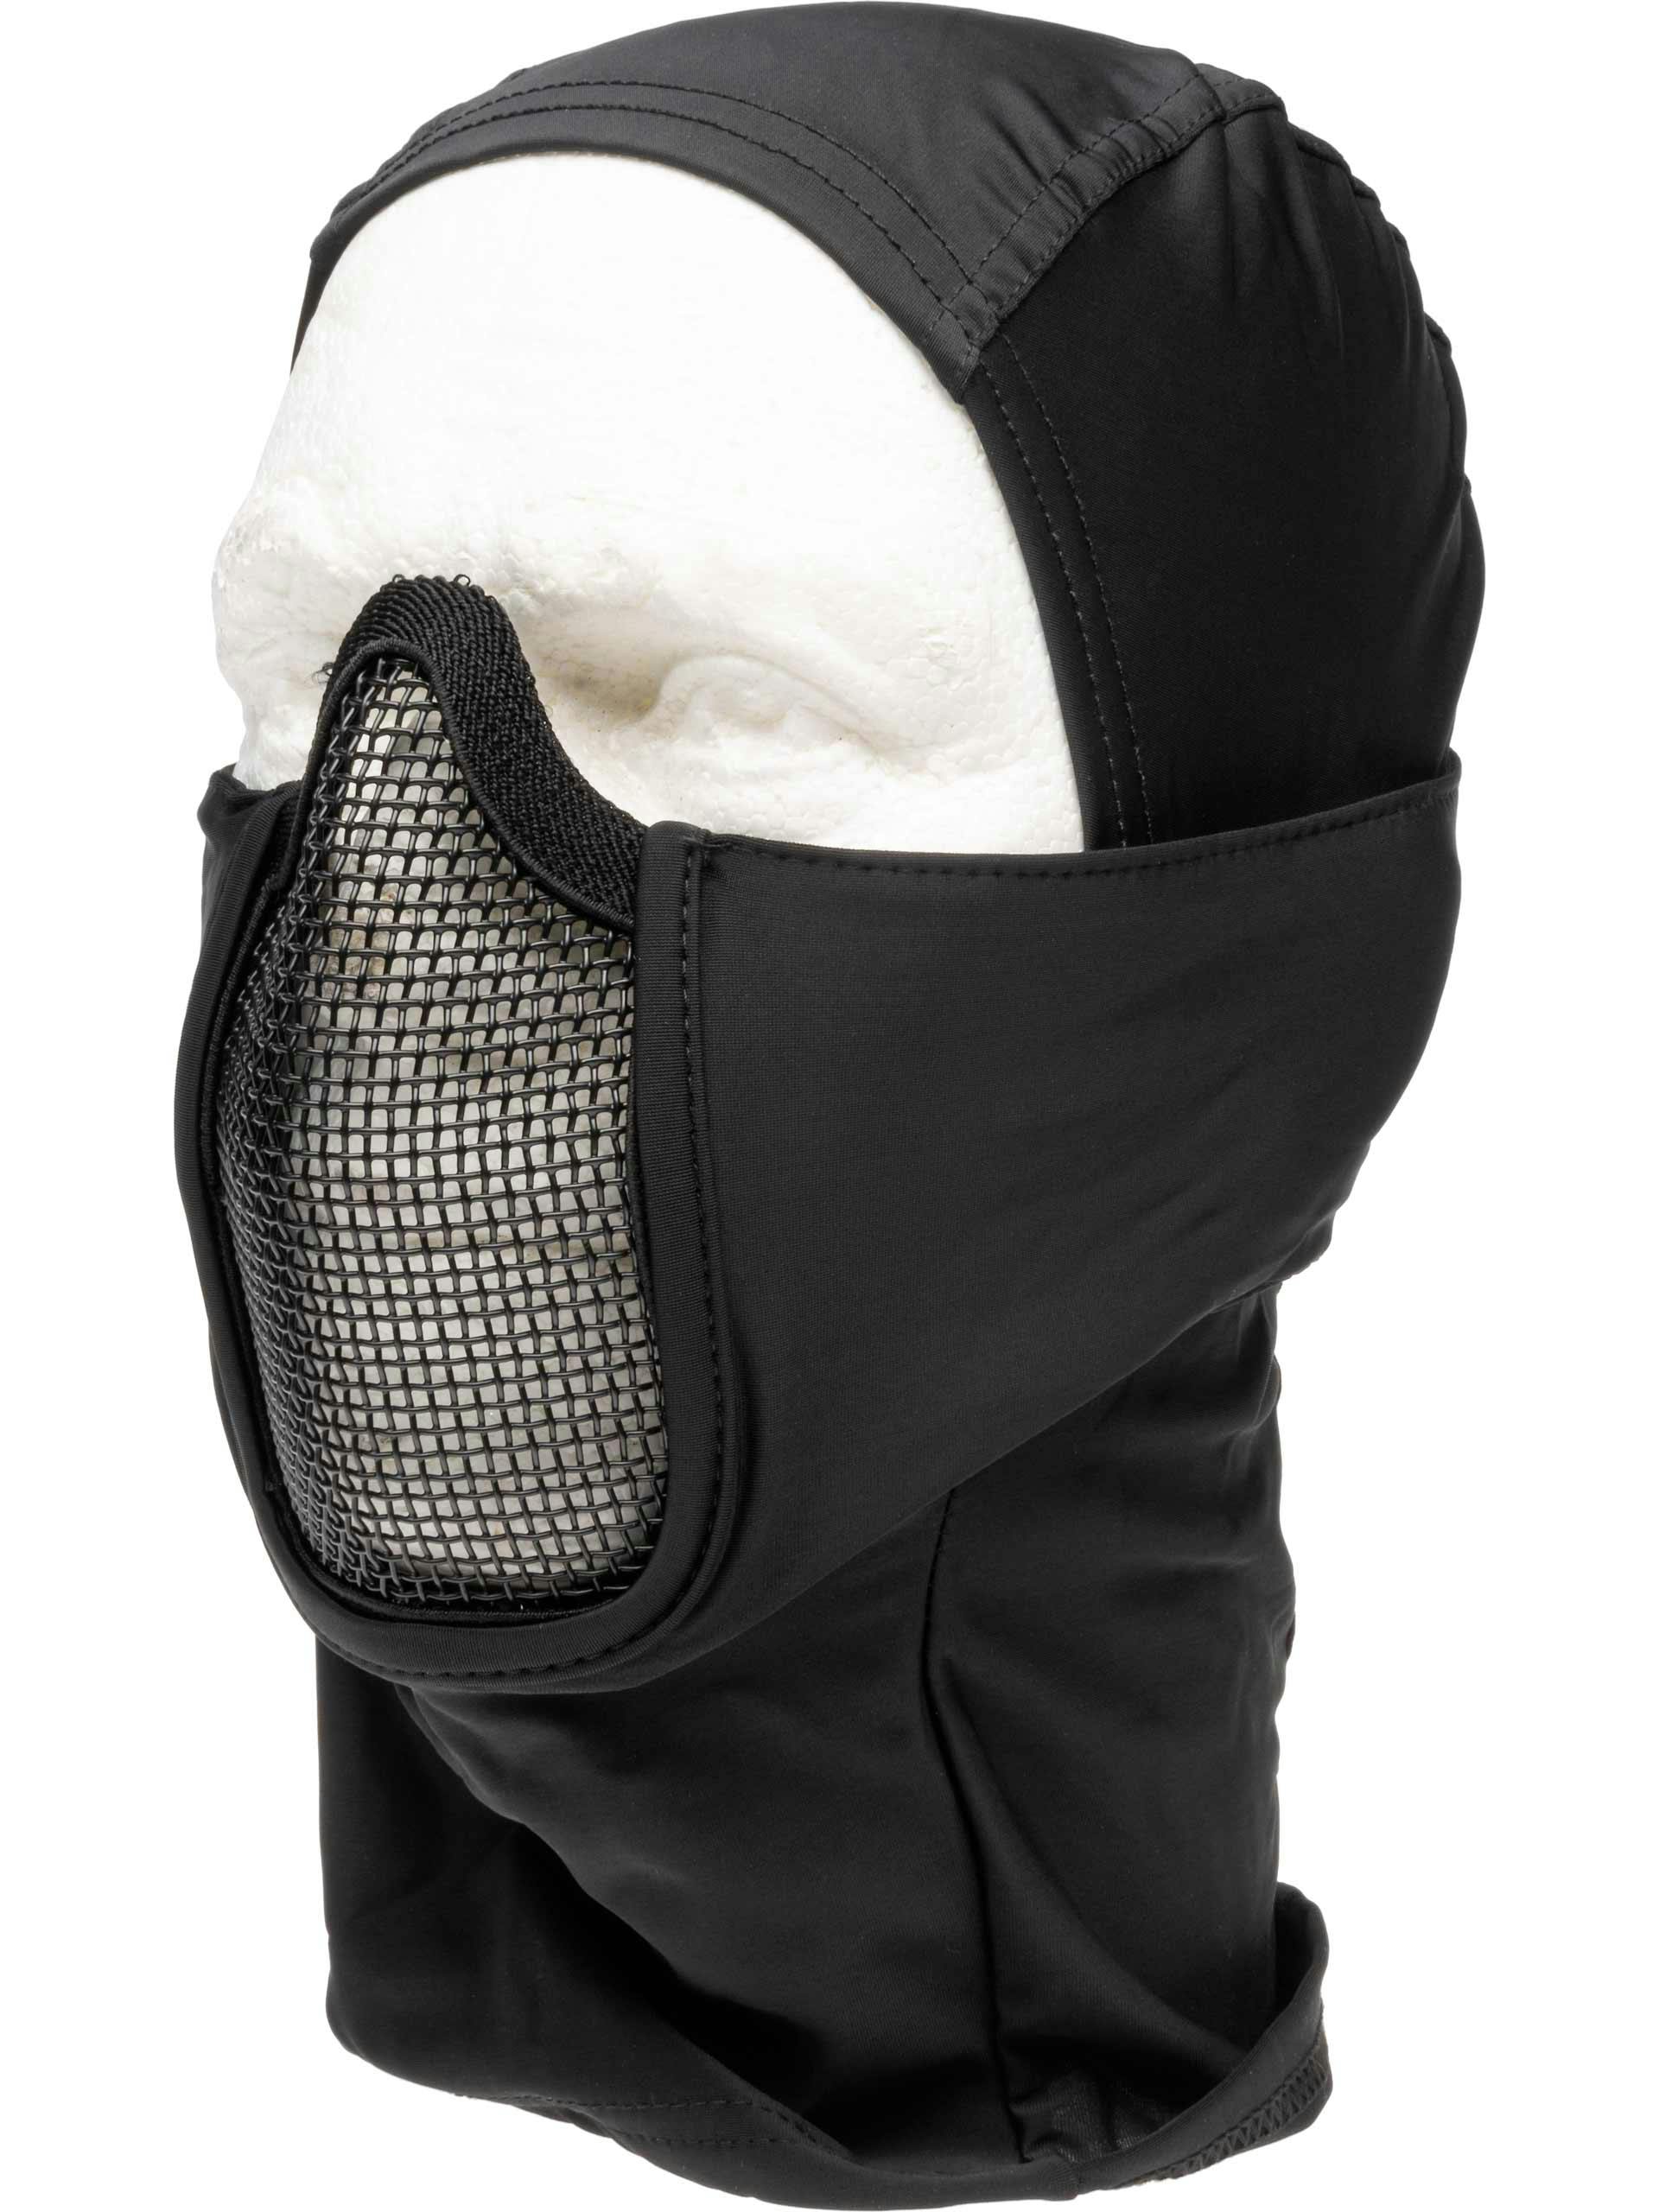 VIPER SPECIAL OPS FACE MASK NEOPRENE PROTECTIVE PAINTBALLING BALACLAVA AIRSOFT 